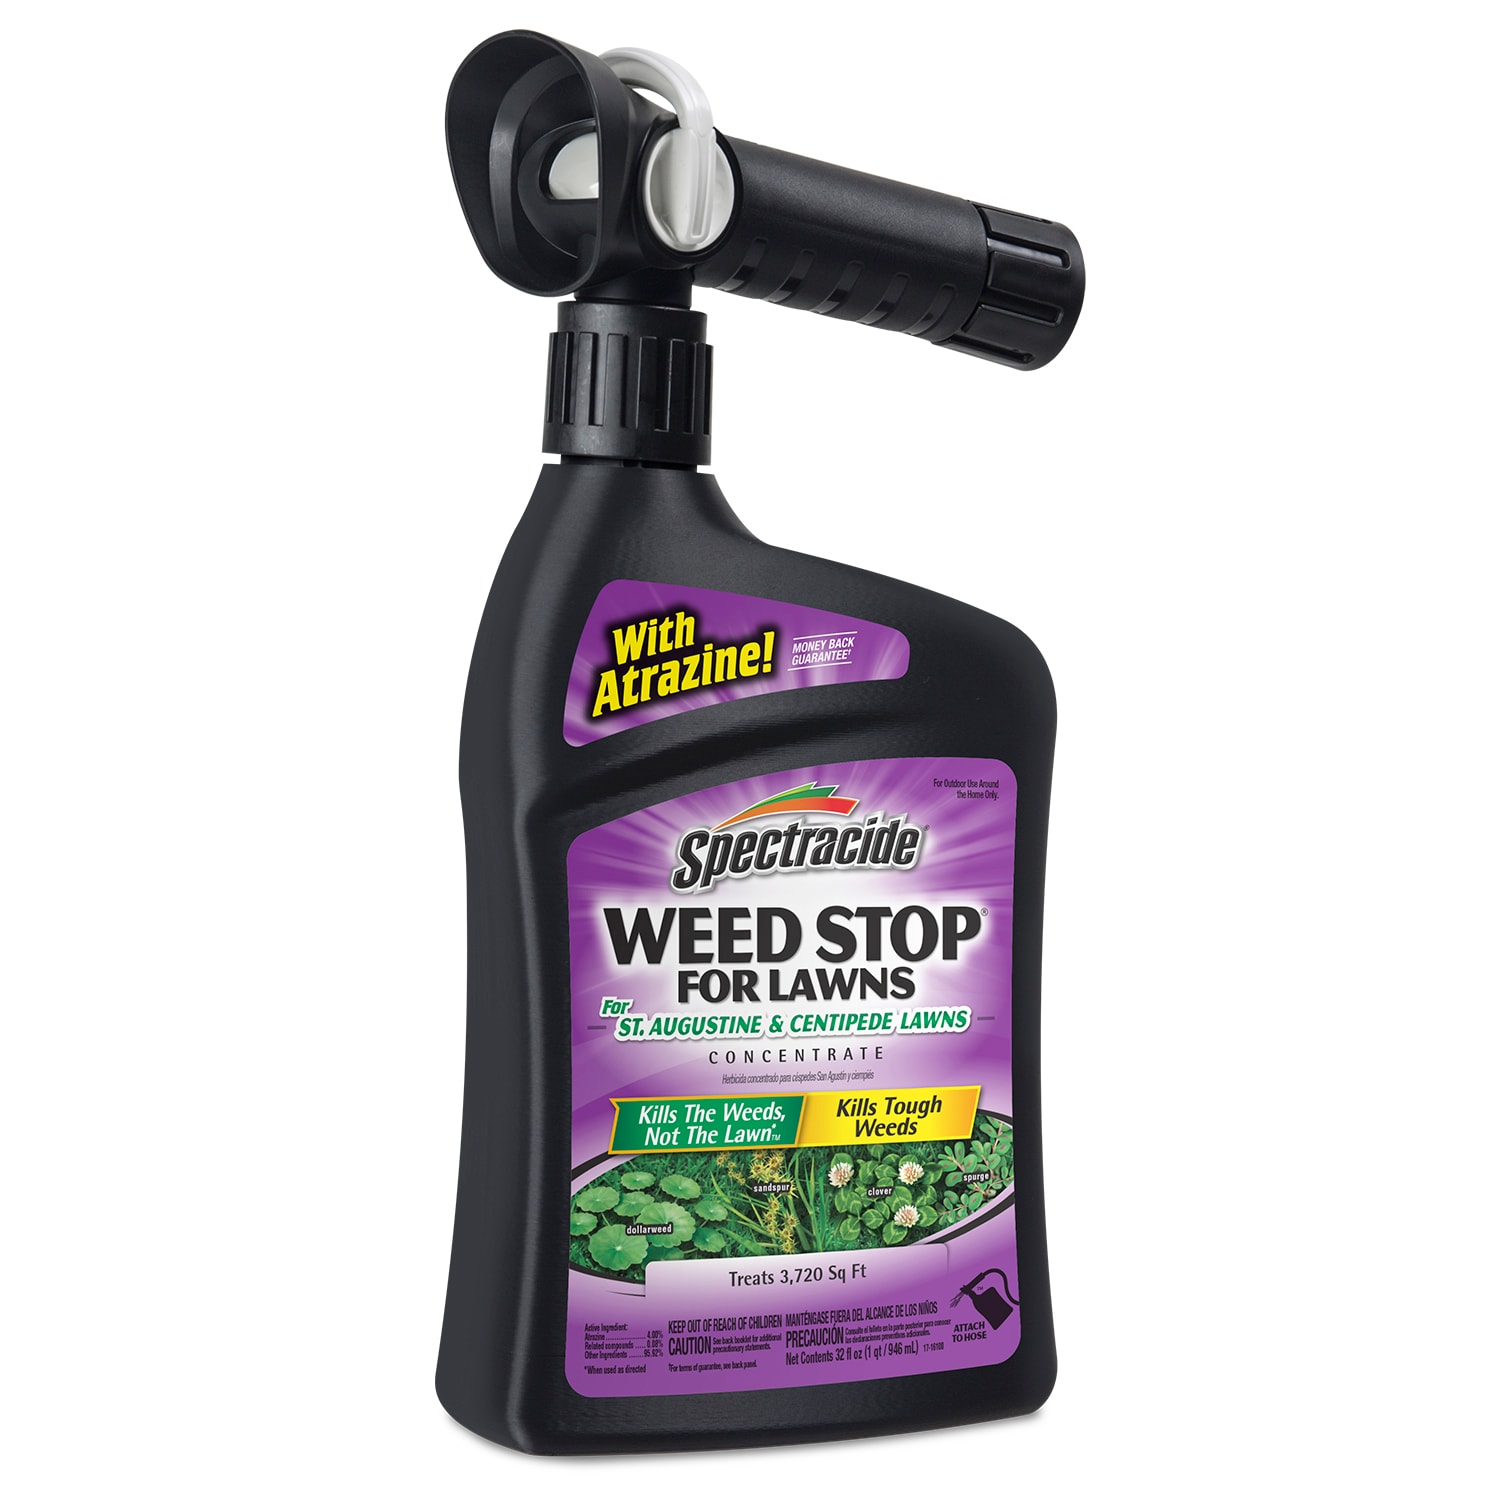 Spectracide Weed Stop for Hose Sprayer and St. Killers Lawns Lawn Weed Weed Killer department the at 32-oz Augustine Centipede End in